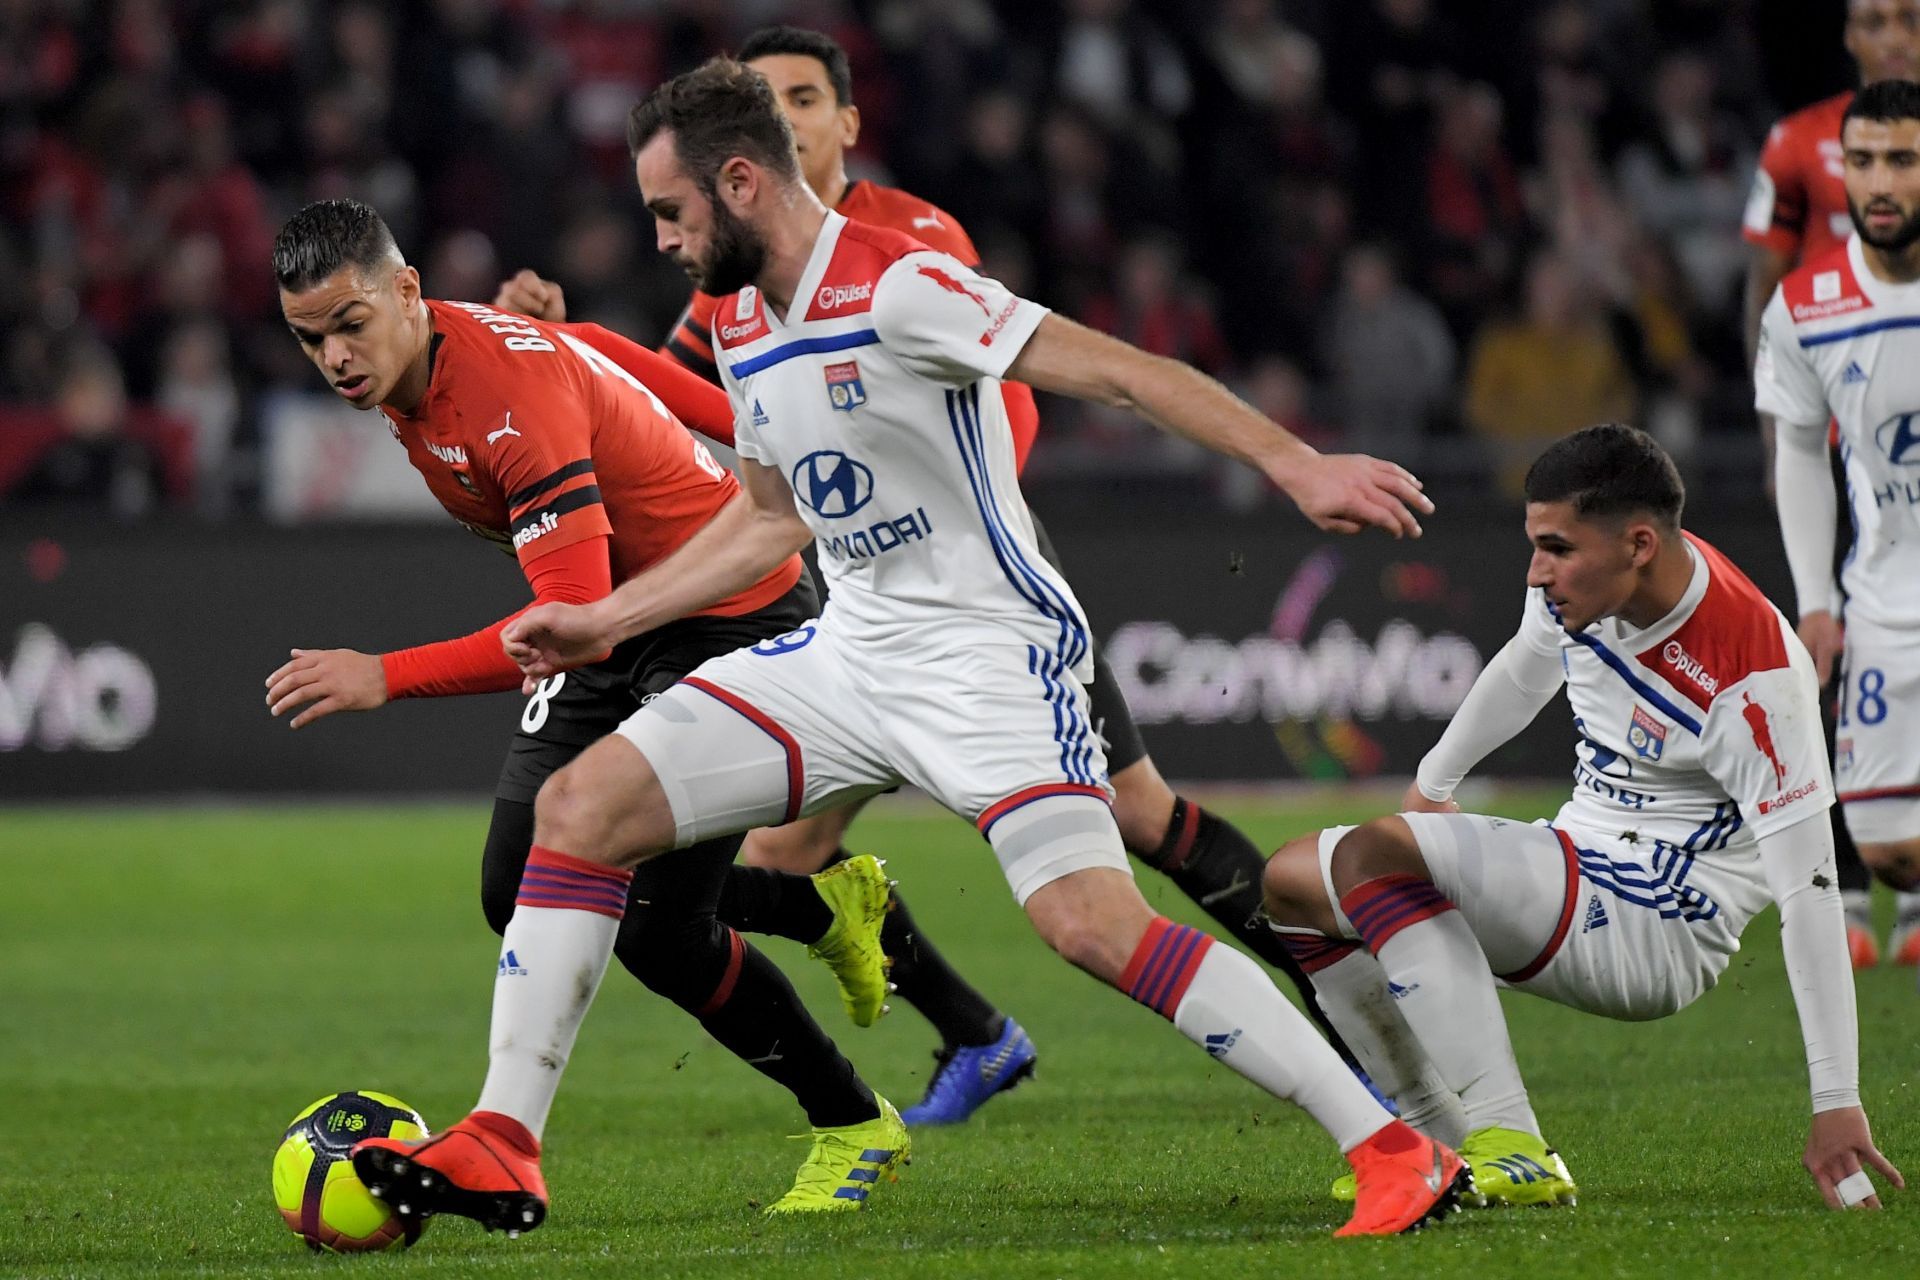 Rennes and Lyon meet in the Ligue 1 on Sunday